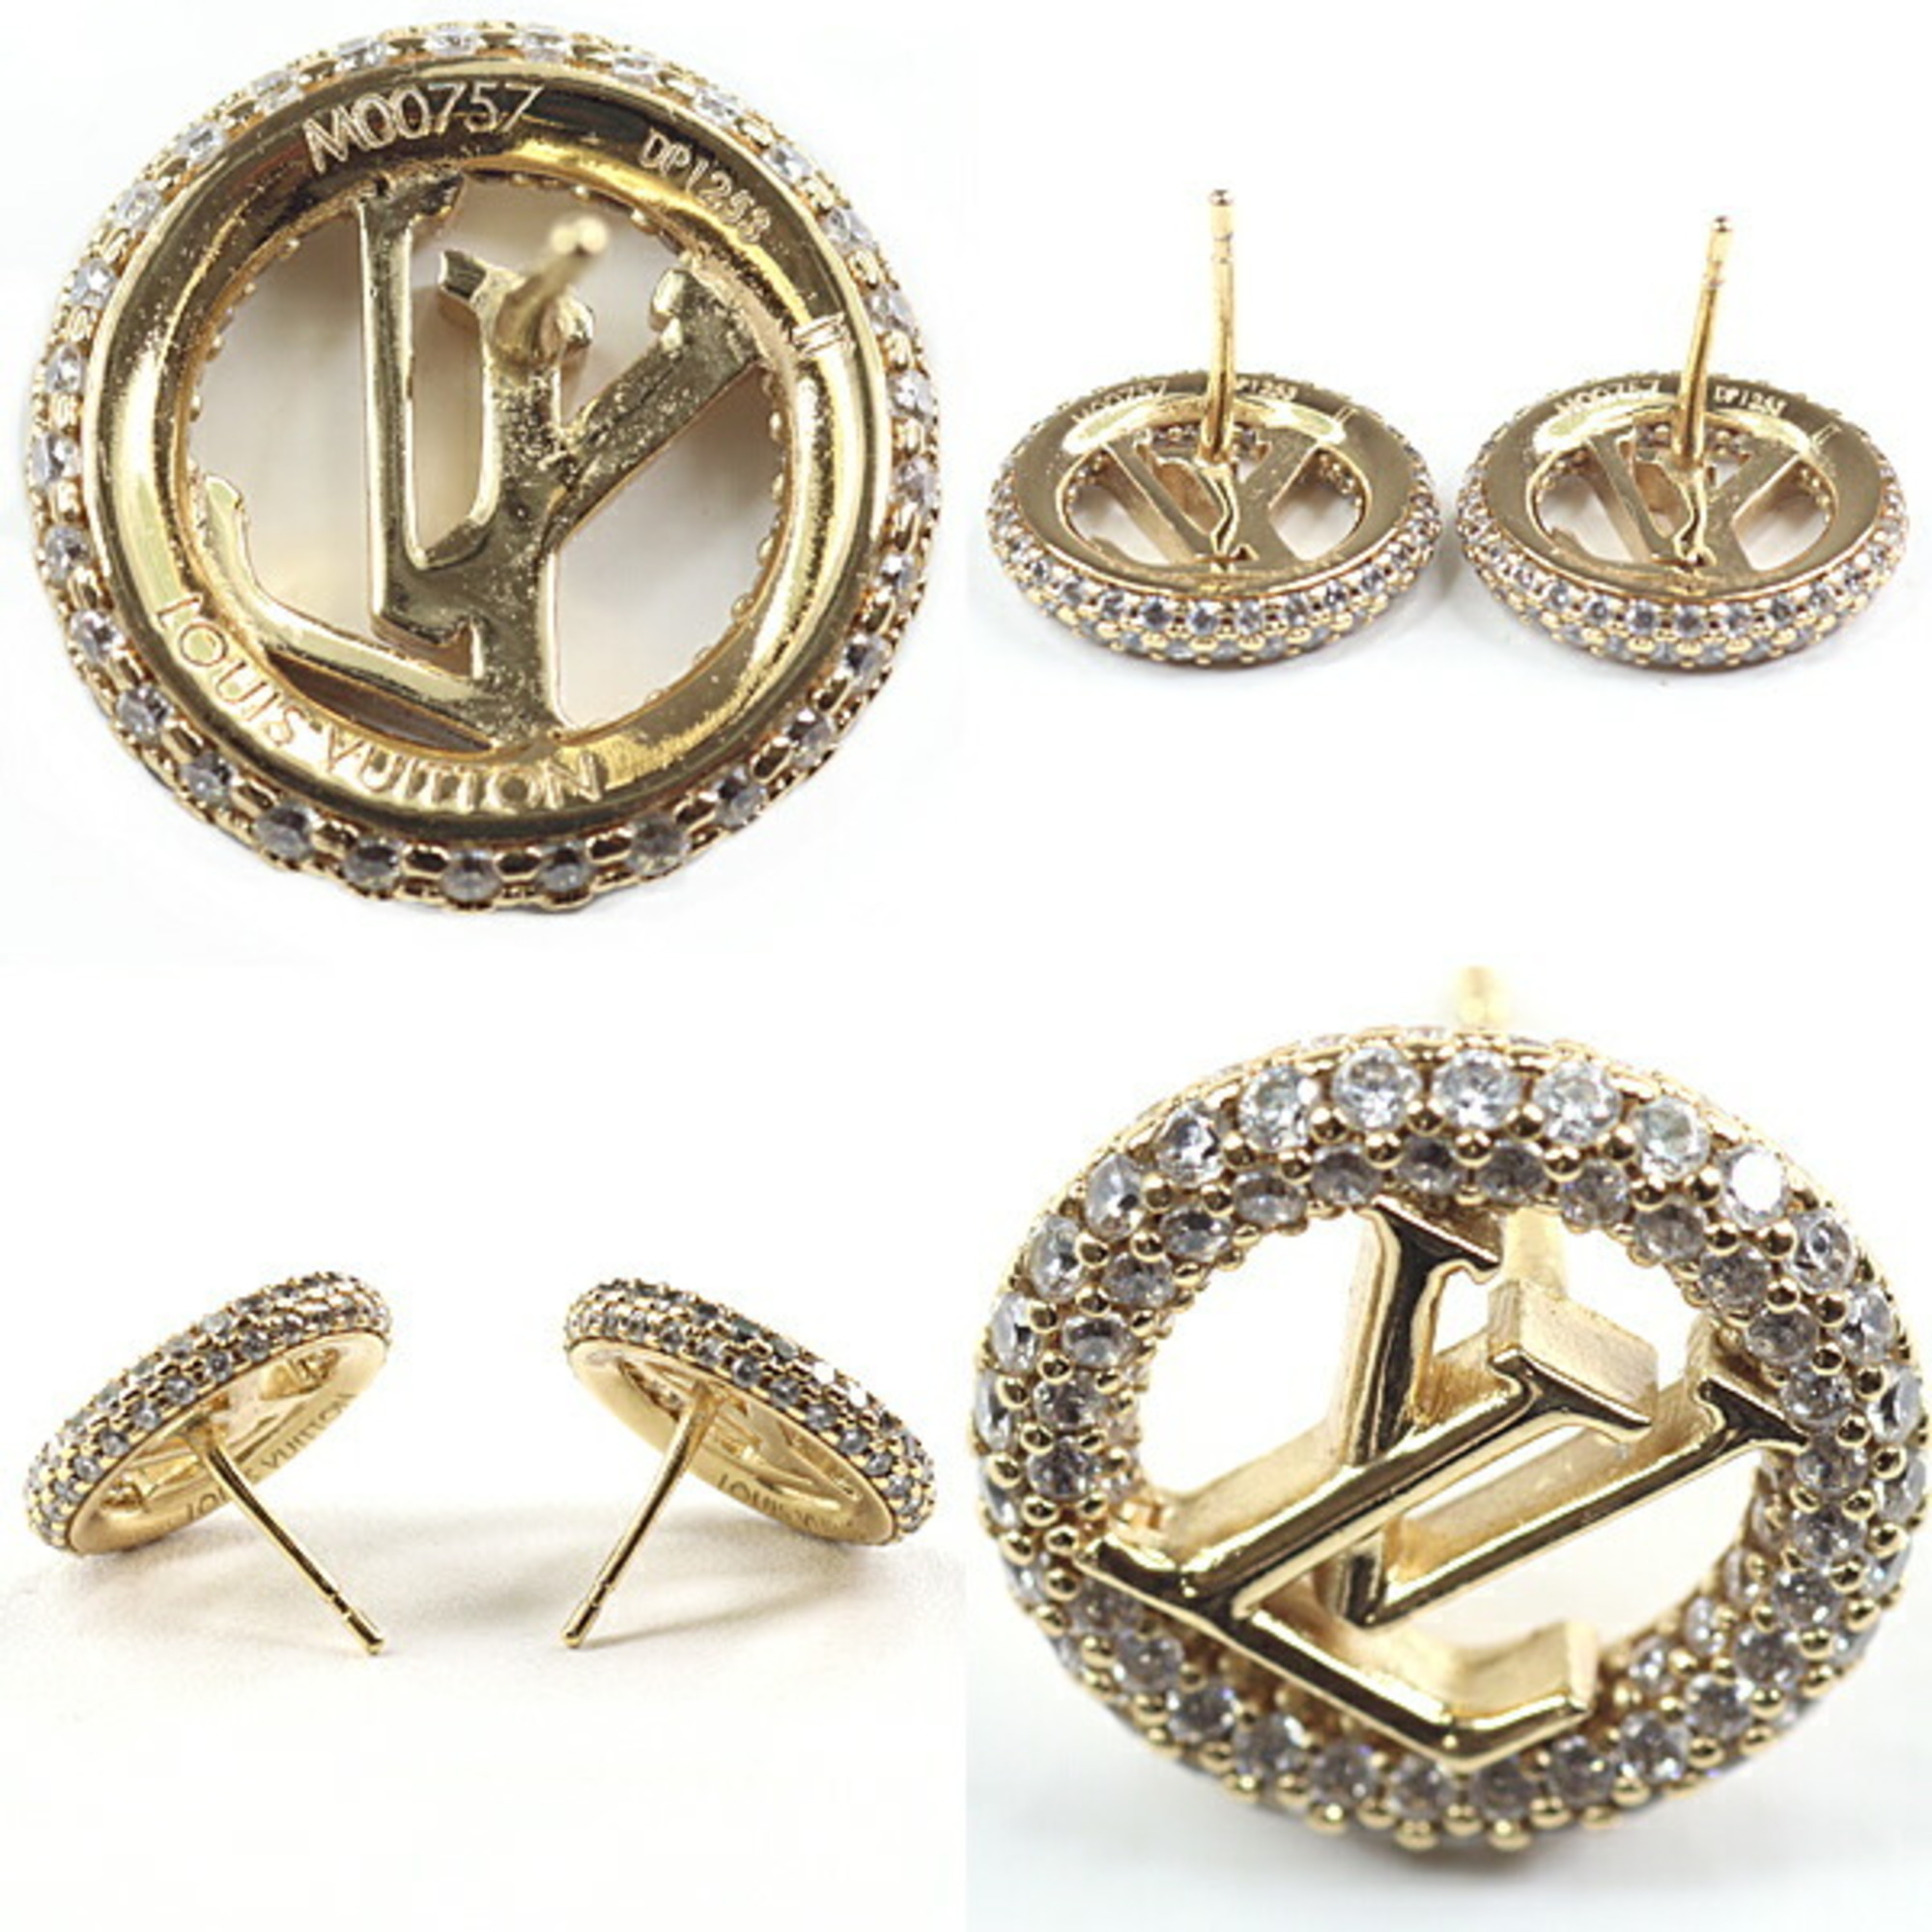 LOUIS VUITTON Earrings Louise by Night LV Circle Strass M00757 Gold